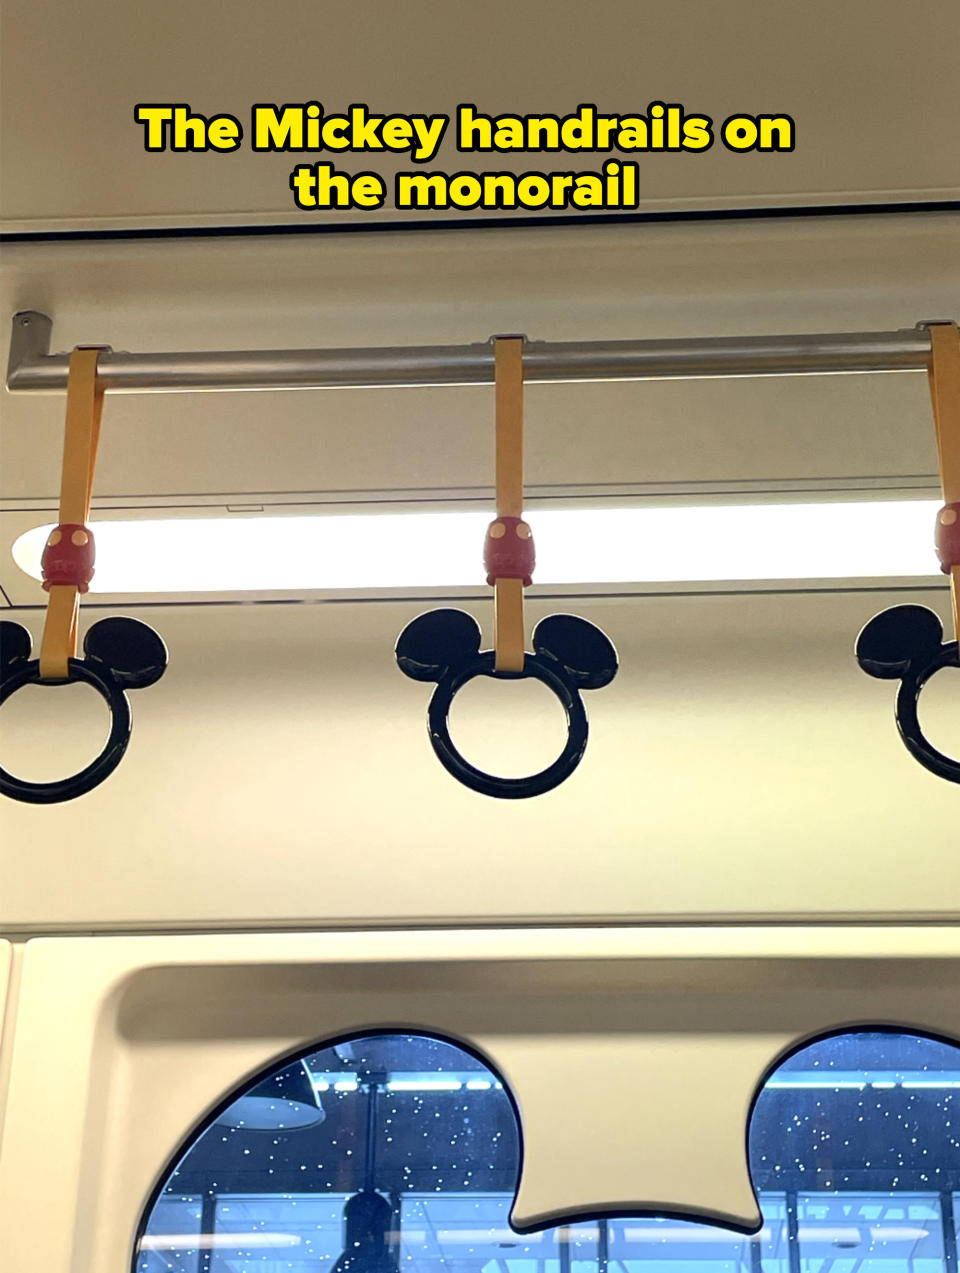 Hand grips shaped like Mickey Mouse ears with yellow straps are hanging in a vehicle, likely a train or bus